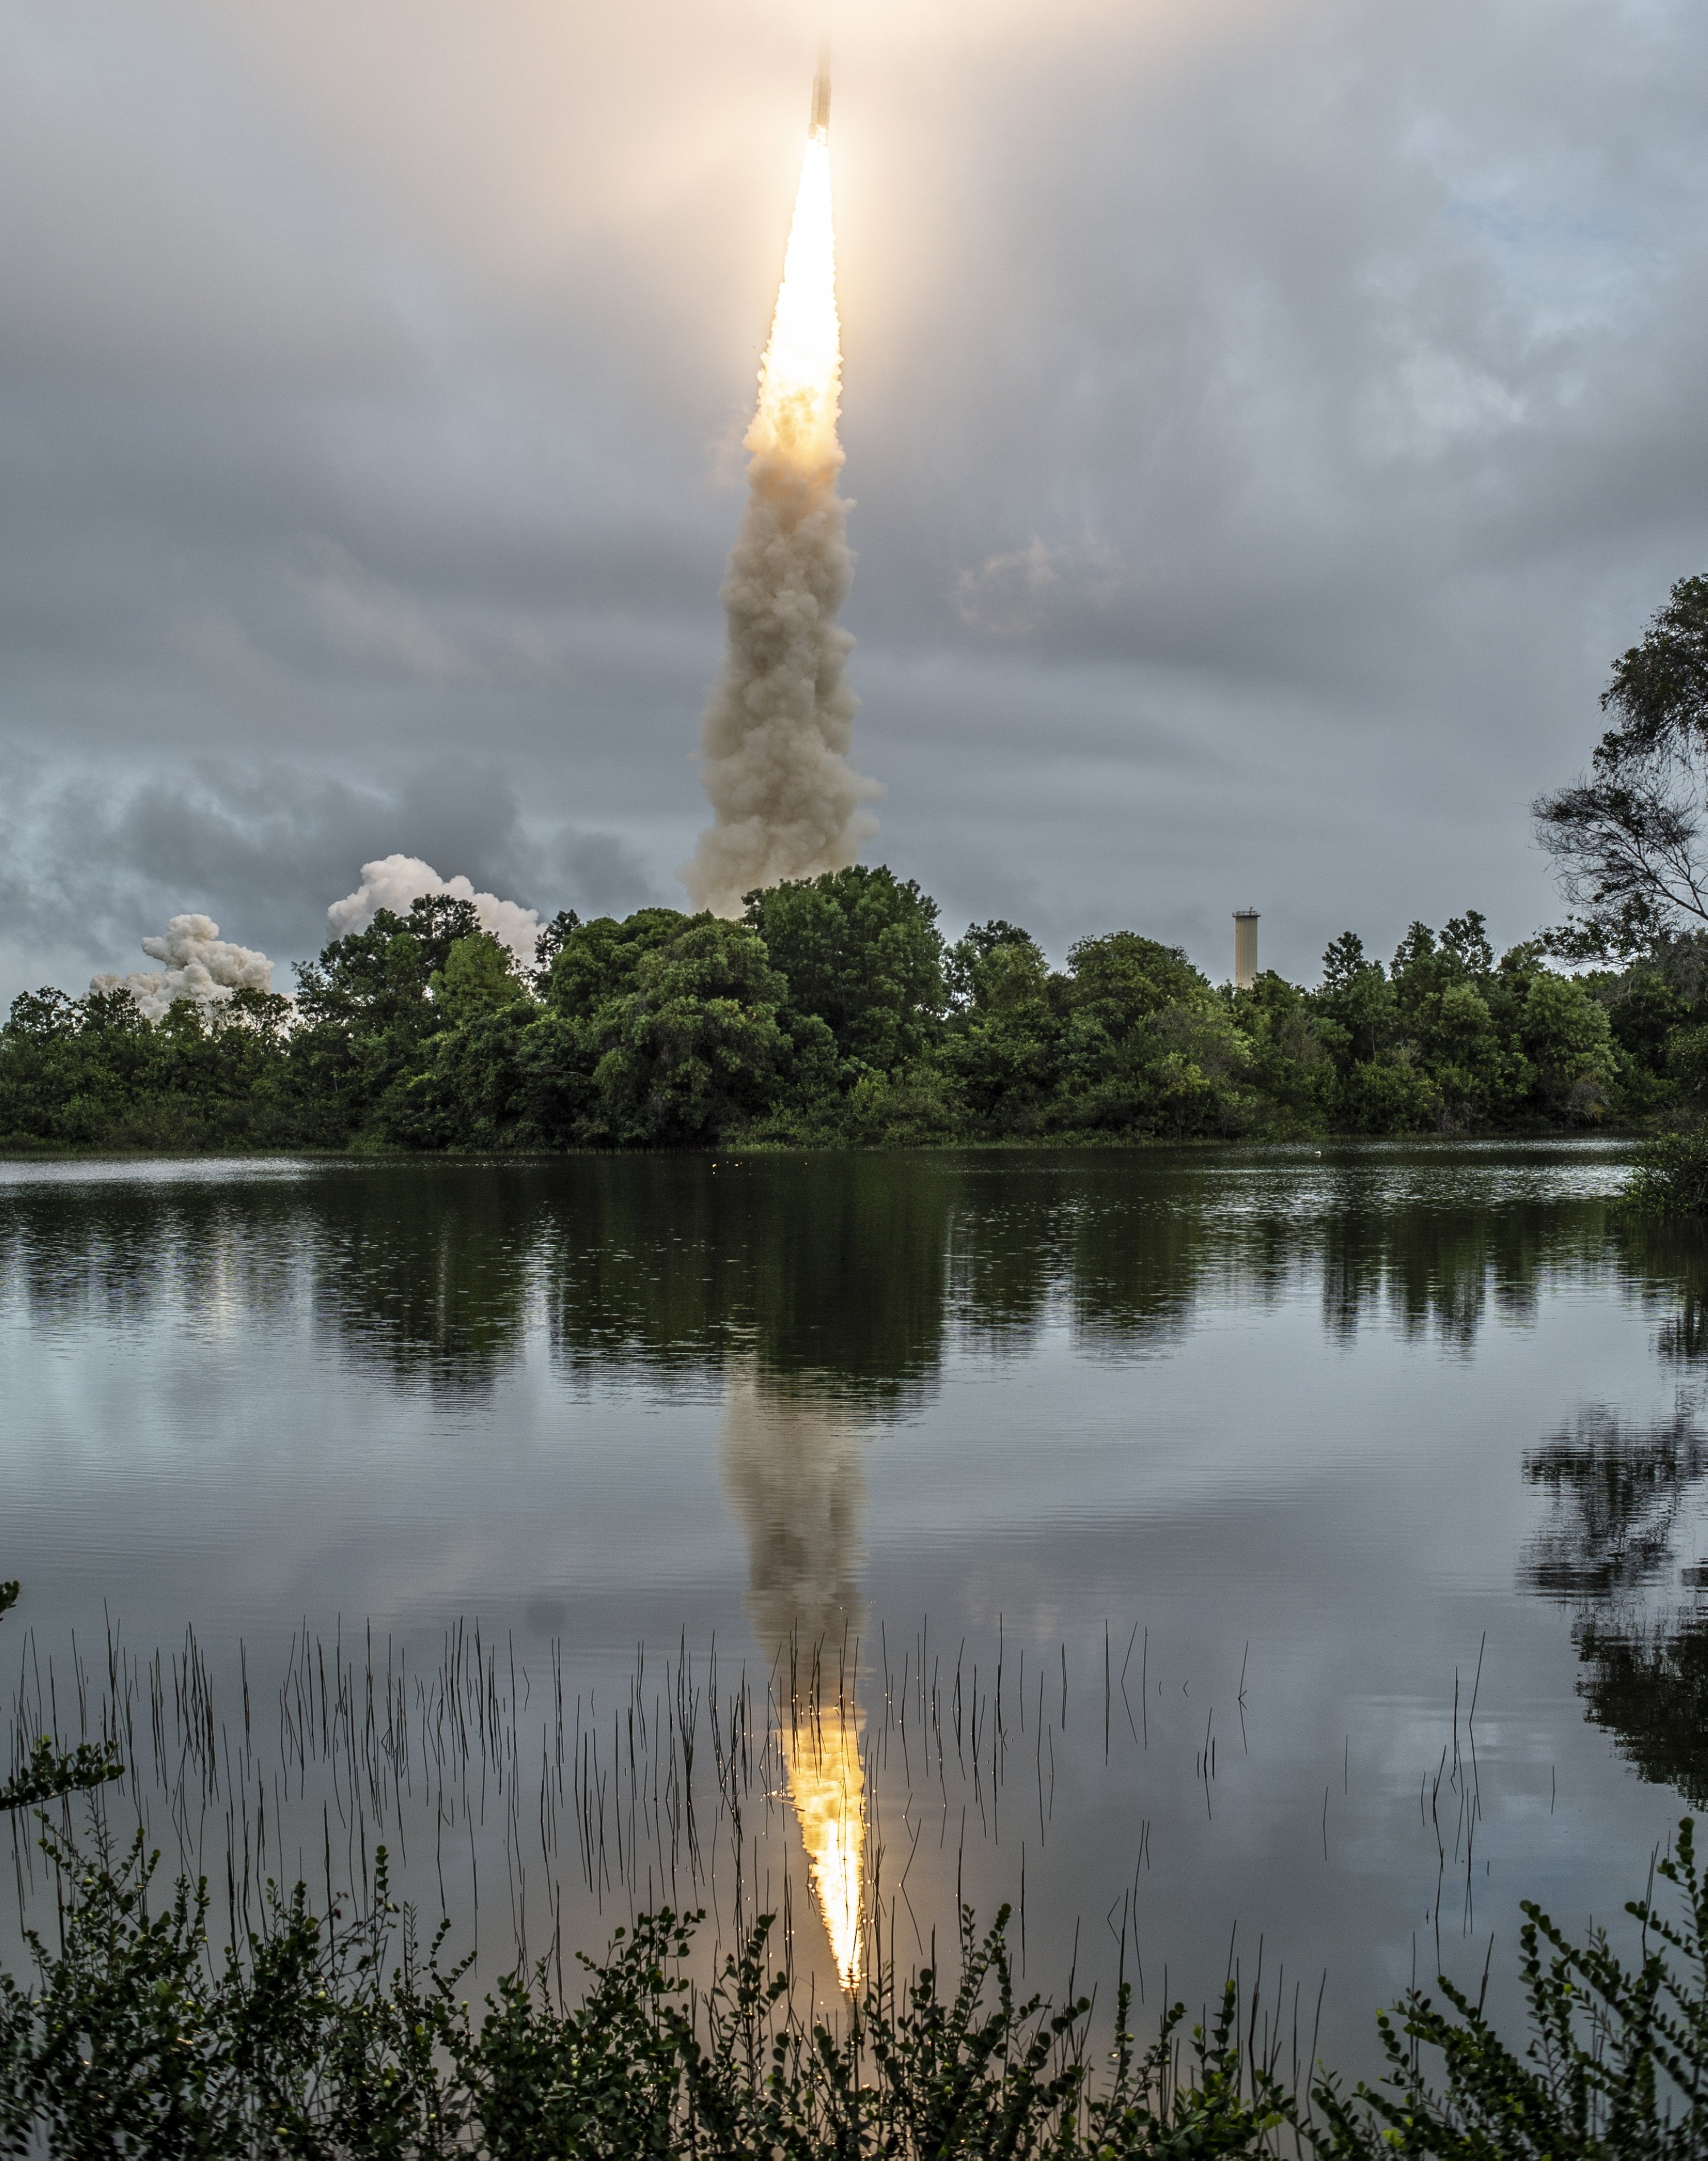 The James Webb Space Telescope is launched with an Ariane 5 rocket from the site in French Guiana on the northeast coast of South America, Dec. 25, 2021. (AA Photo)